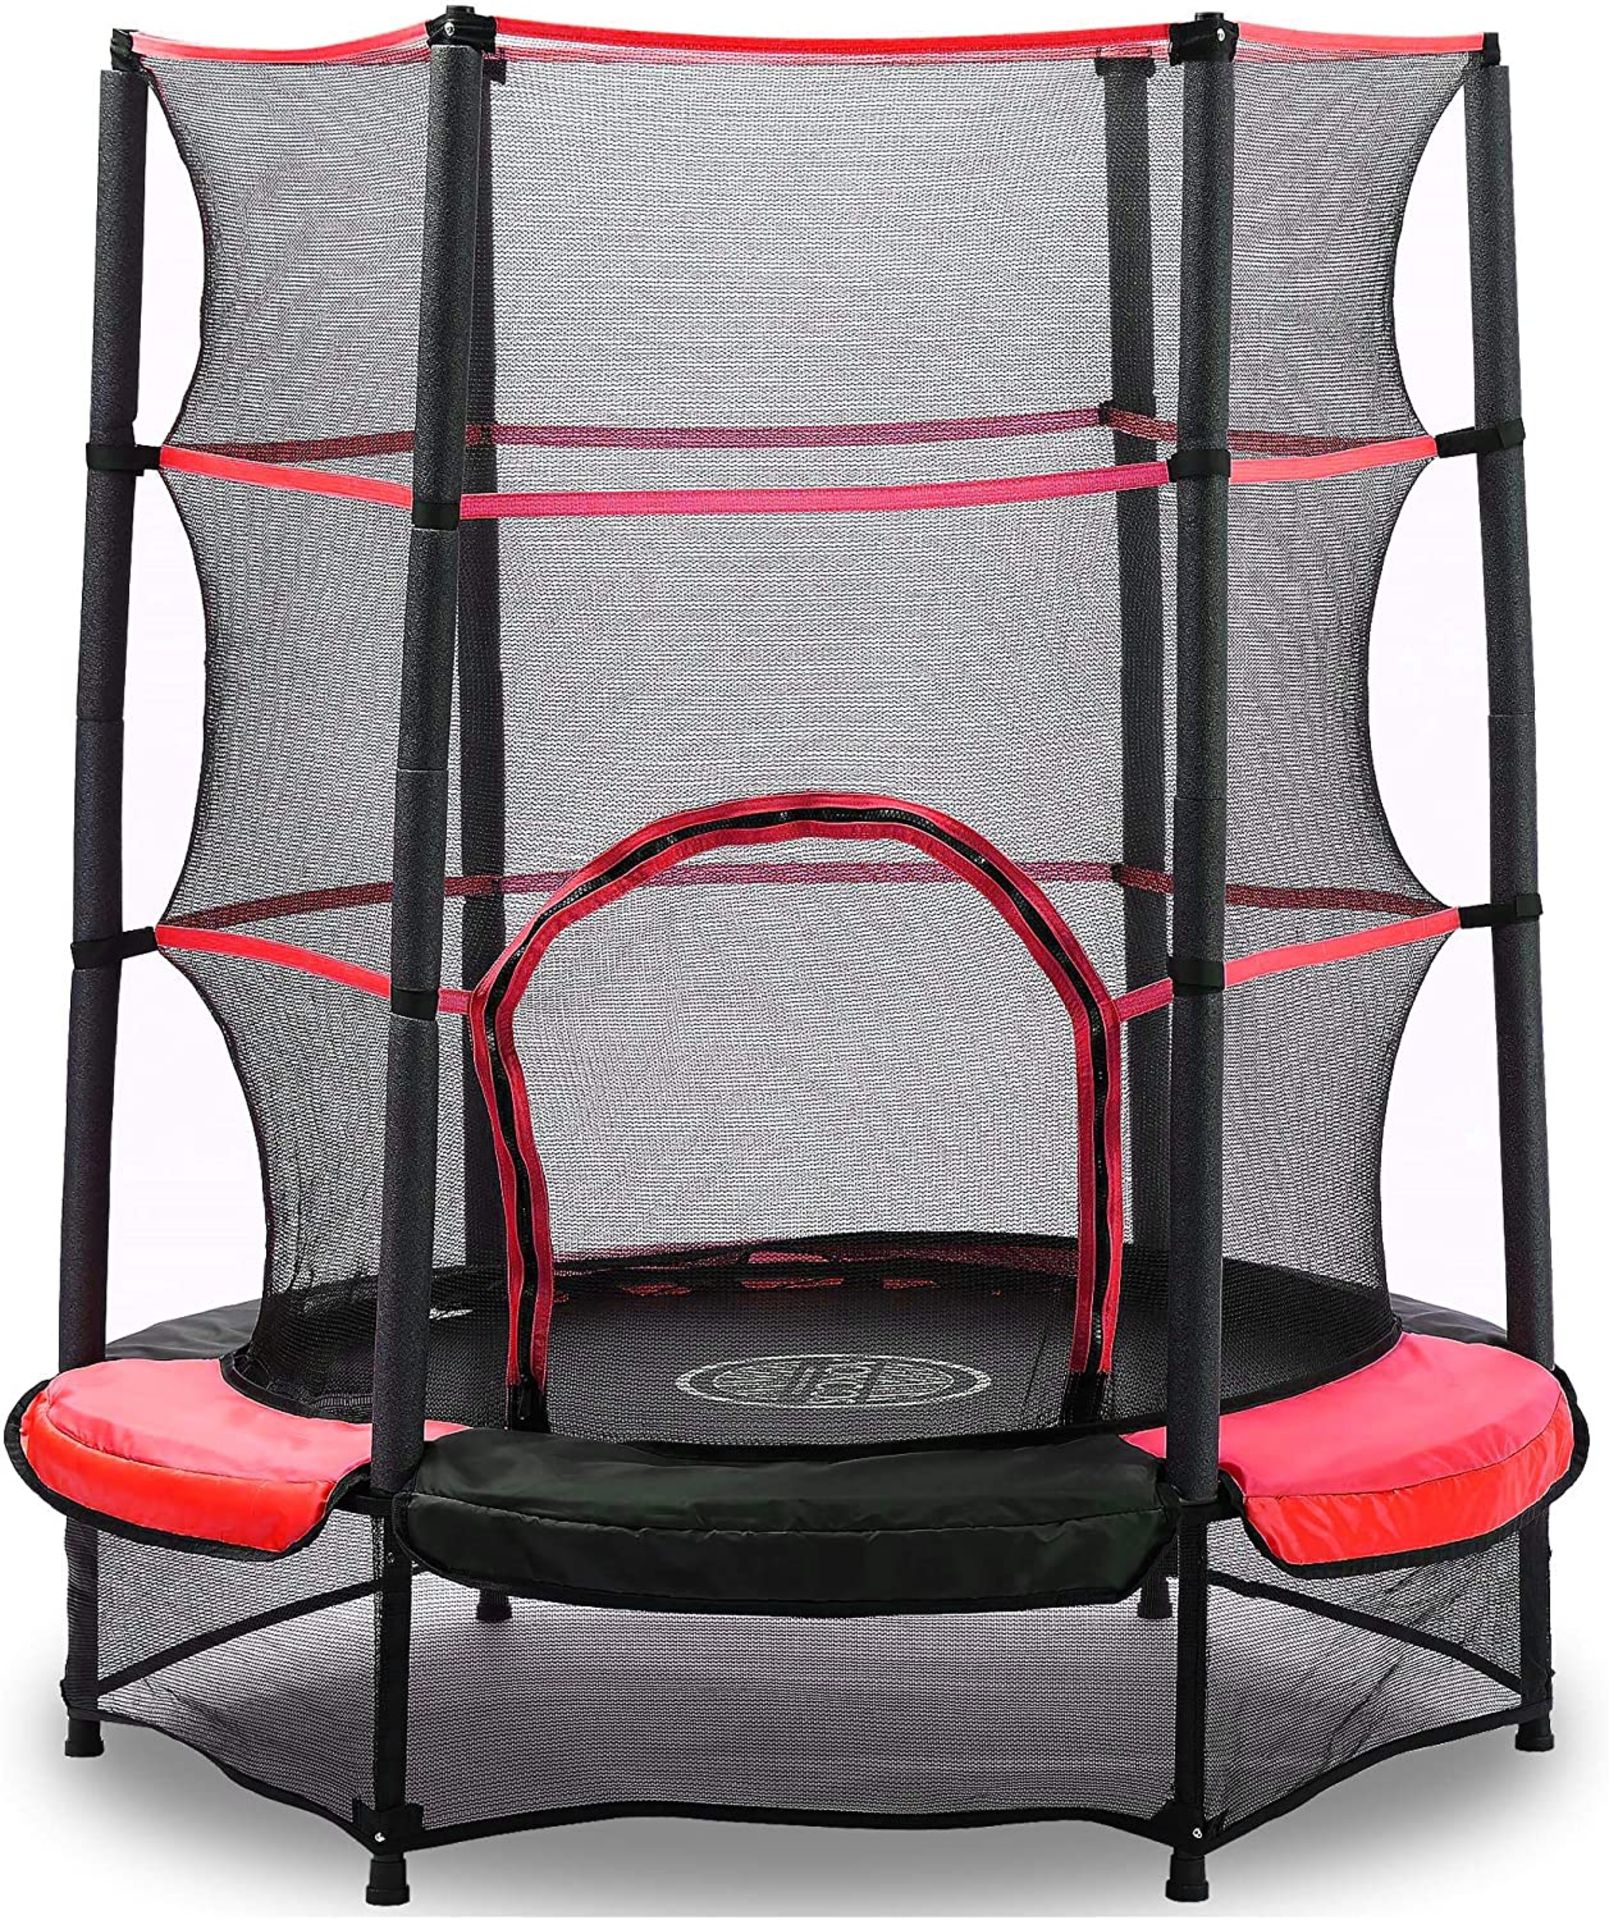 Brand new 54” Trampoline for Kids, Mini Toddler Trampoline with Safety Enclosure, Indoor & Outdoor - Image 3 of 3